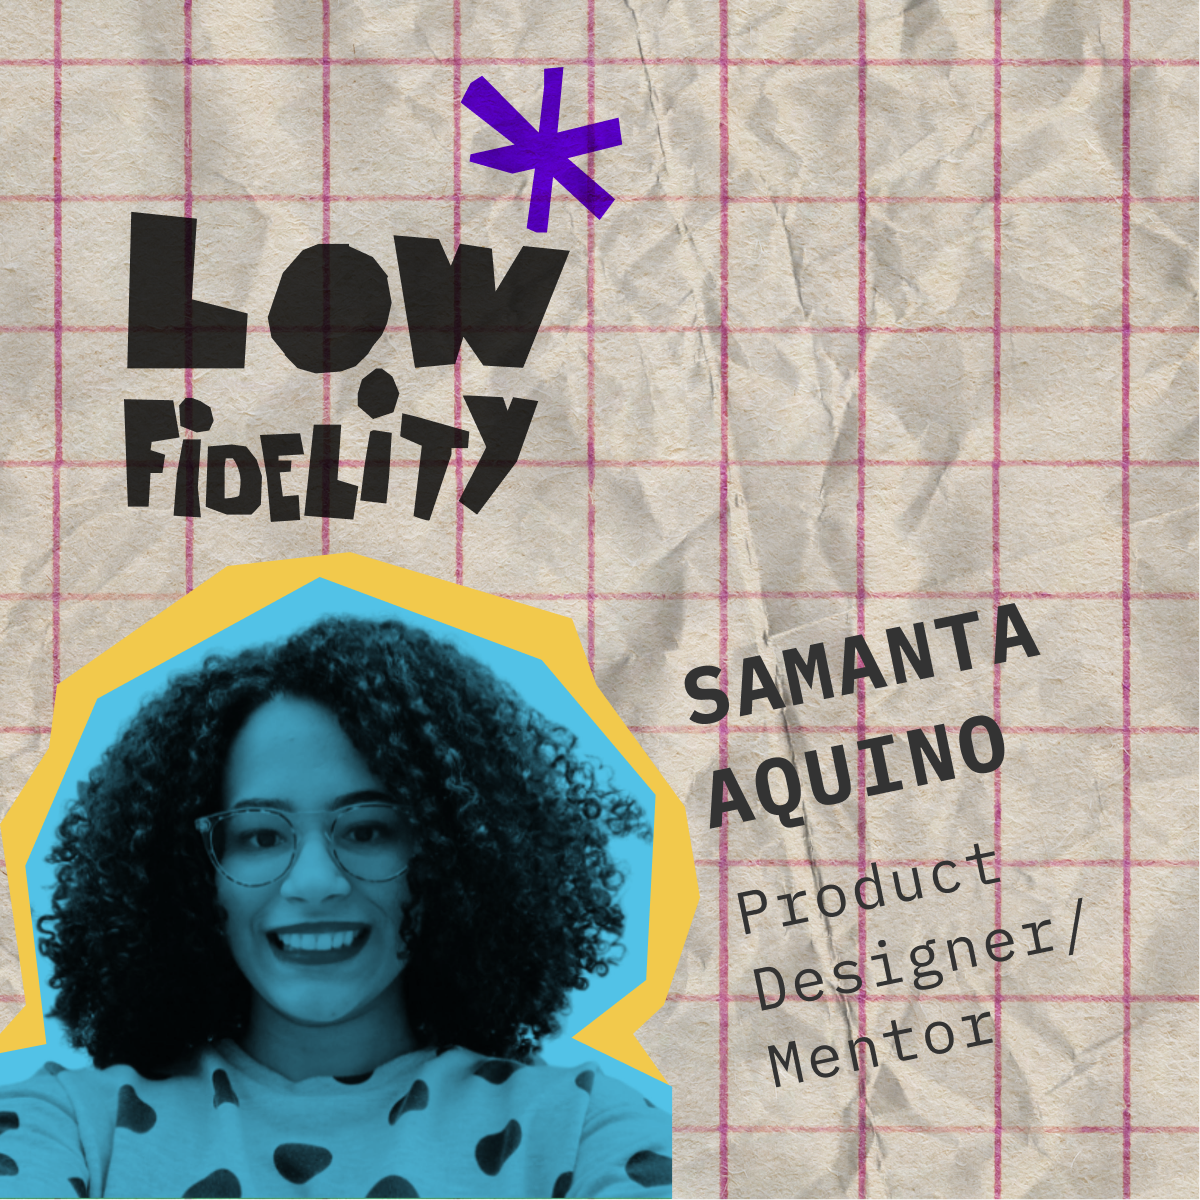 6. Get unstuck in your career and stand up to impostor syndrome by taking action with Samanta Aquino